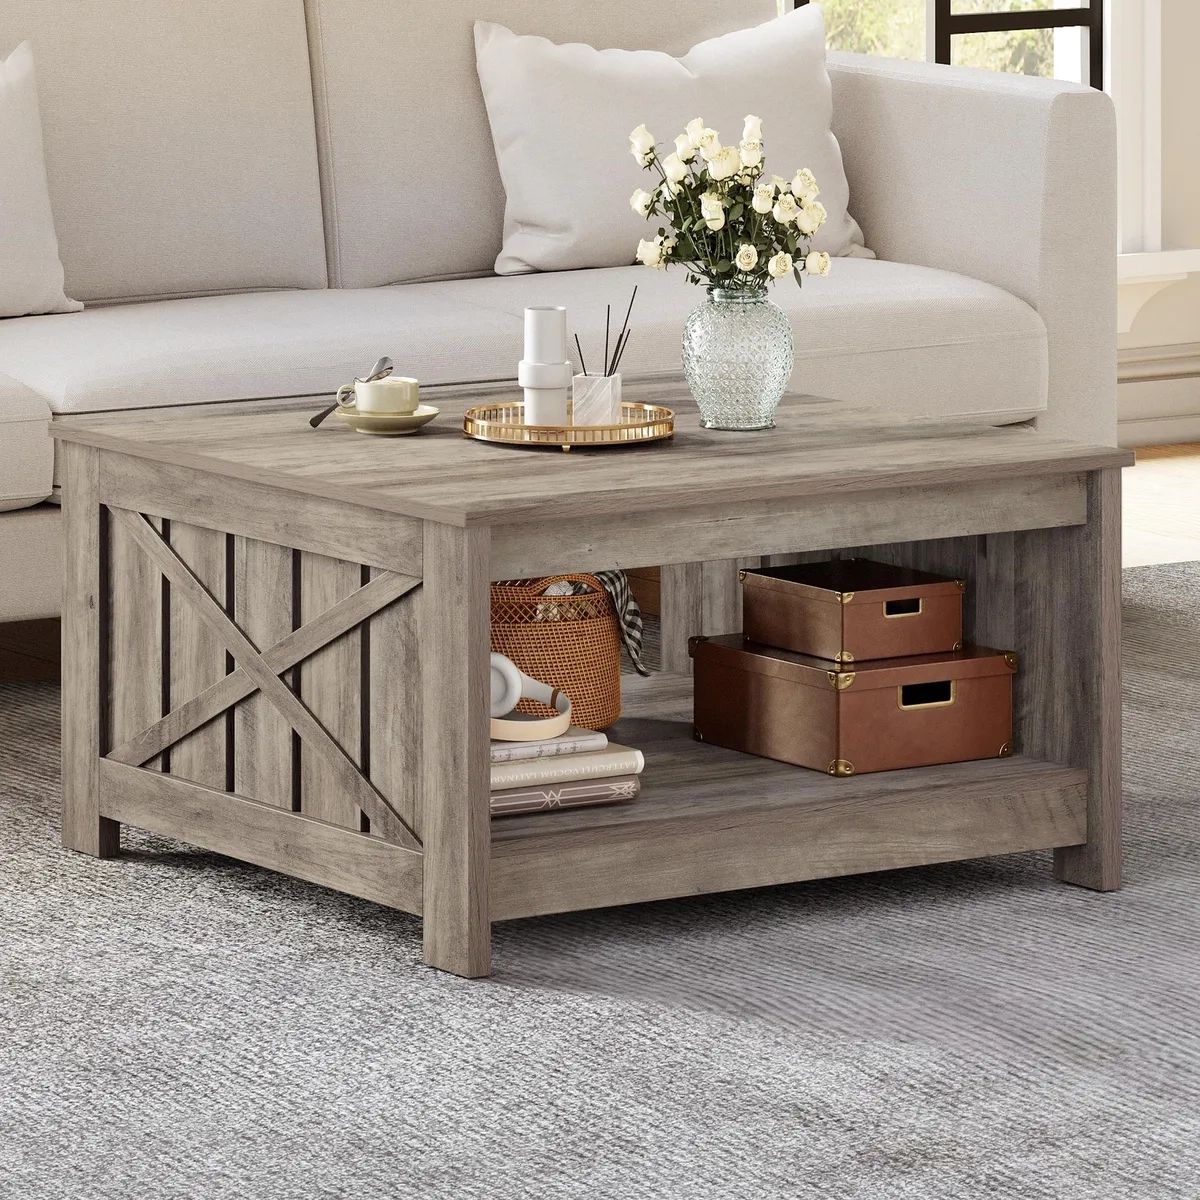 Square Coffee Table With Storage Farmhouse Cocktail Table W/ Open Storage  Shelf | Ebay In Coffee Tables With Storage And Barn Doors (View 10 of 15)